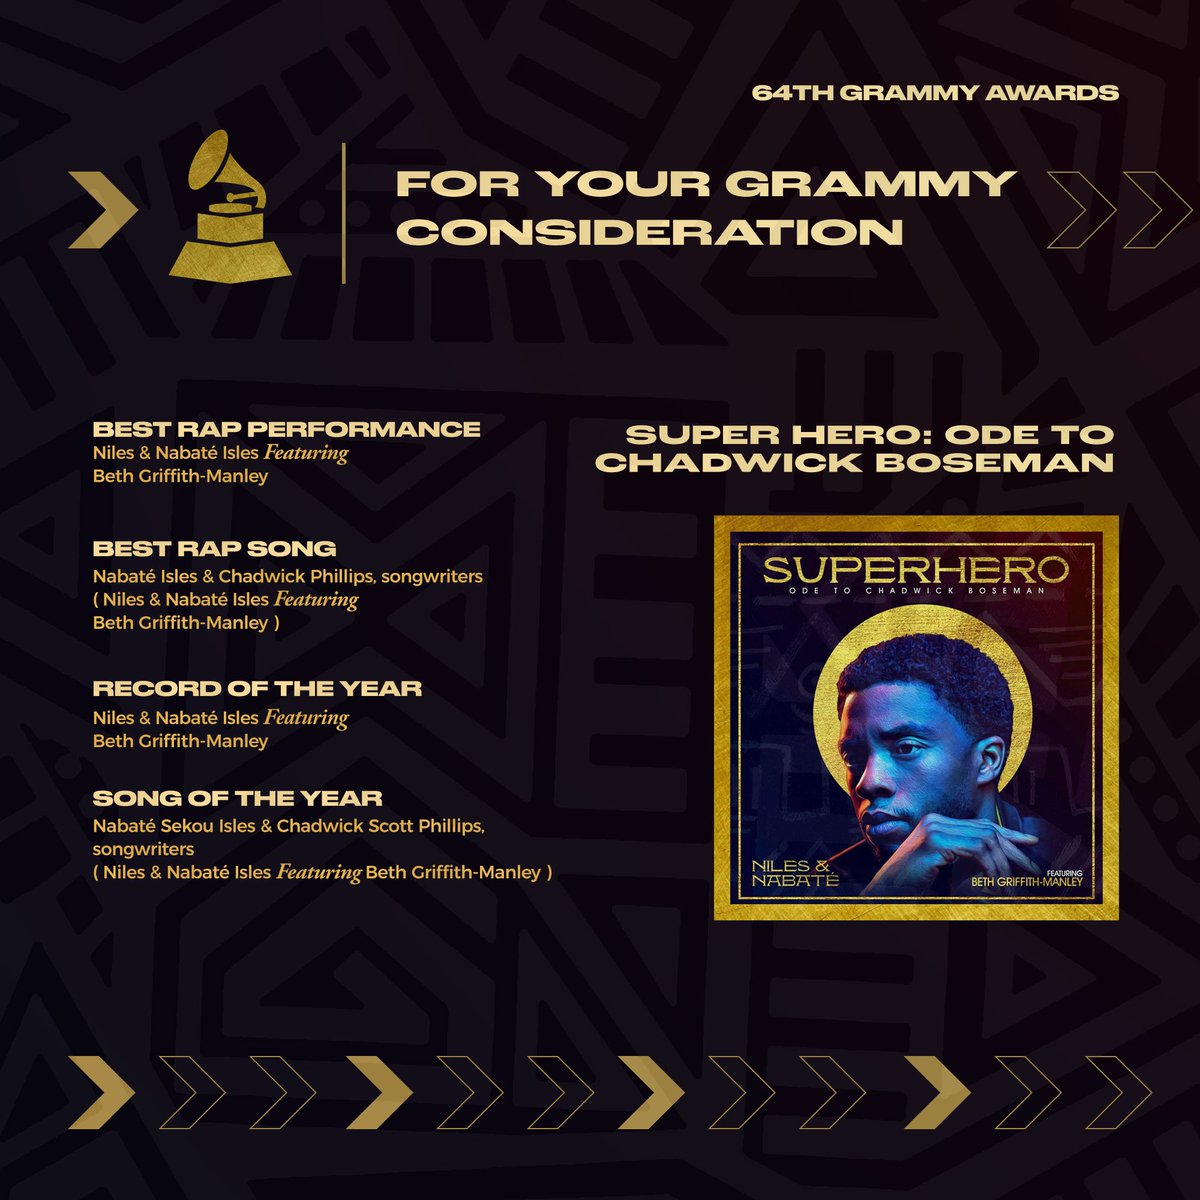 We are part of the 1st Round of nominations for the 64th #GrammyAwards! Pleasure to co-create this tribute to @chadwickboseman w/hip-hop lyricist  @Niles_Davis (of @AvantGardeIs) & feature @bethalwayssings on vocals!

Listen to our labor of love here:
https://t.co/EgrSGWJKwP https://t.co/dK3D3BOLqz